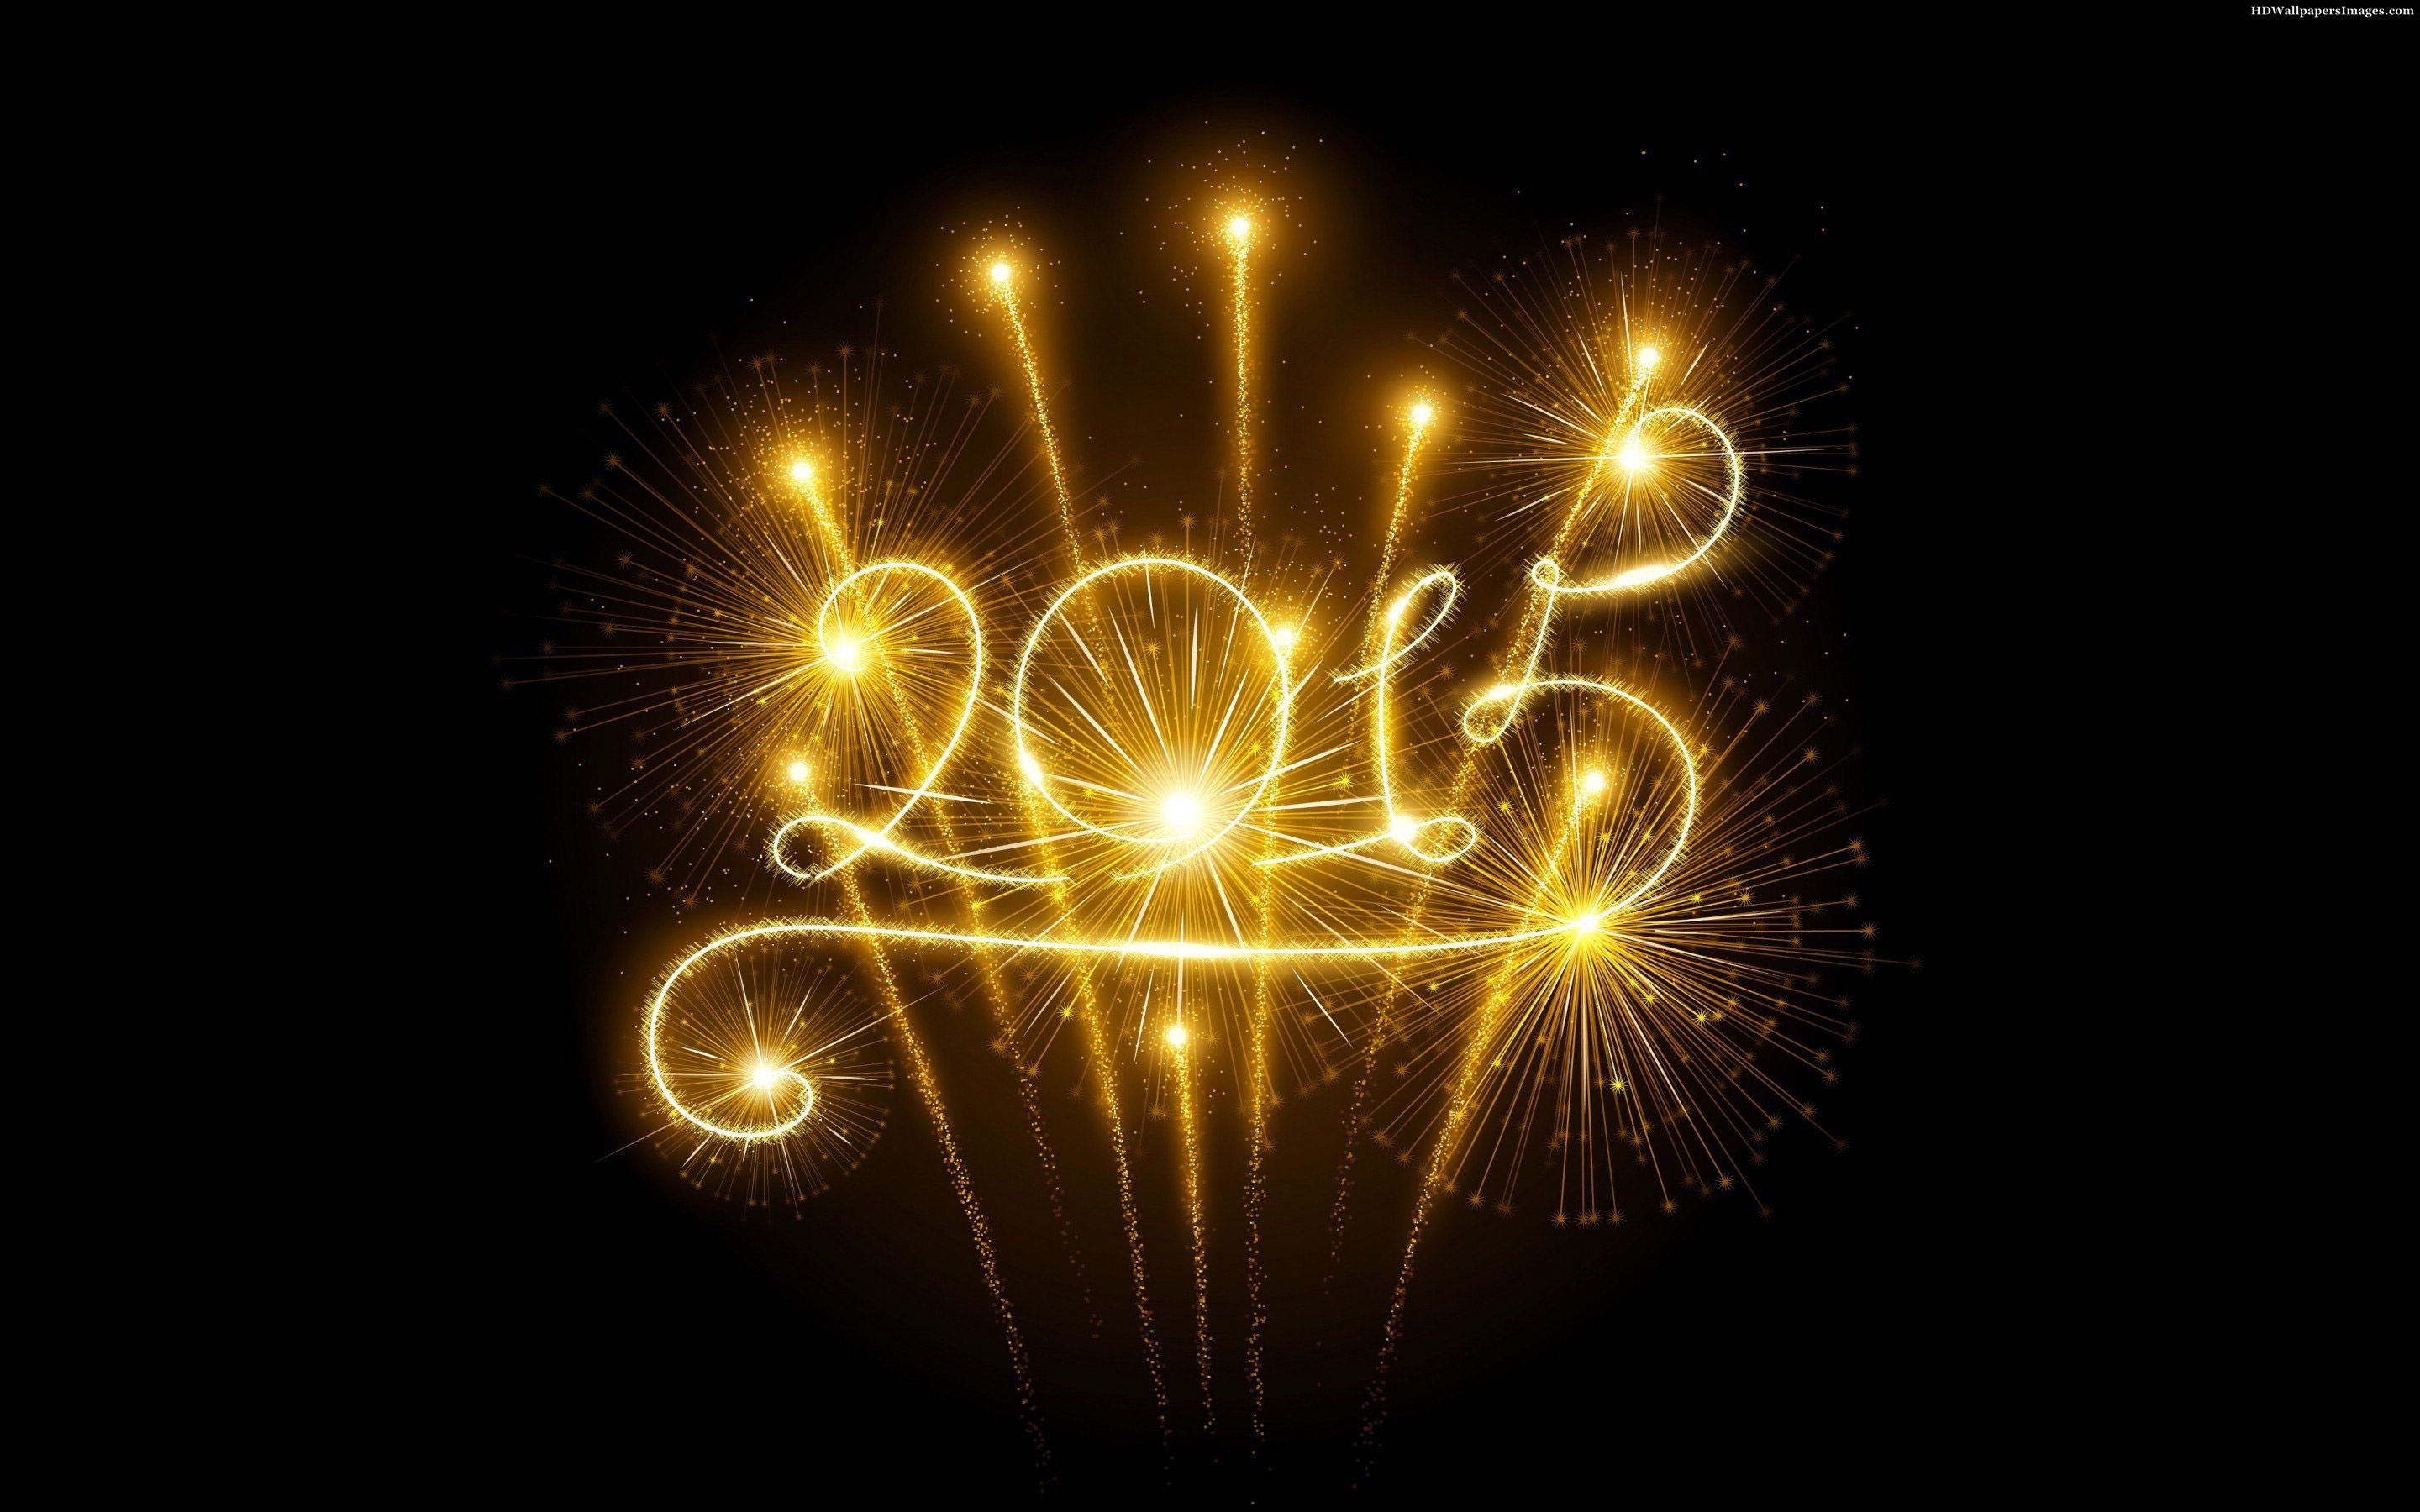 Top 101 Best Happy New Year 2015 Wallpapers, Images and Vectors